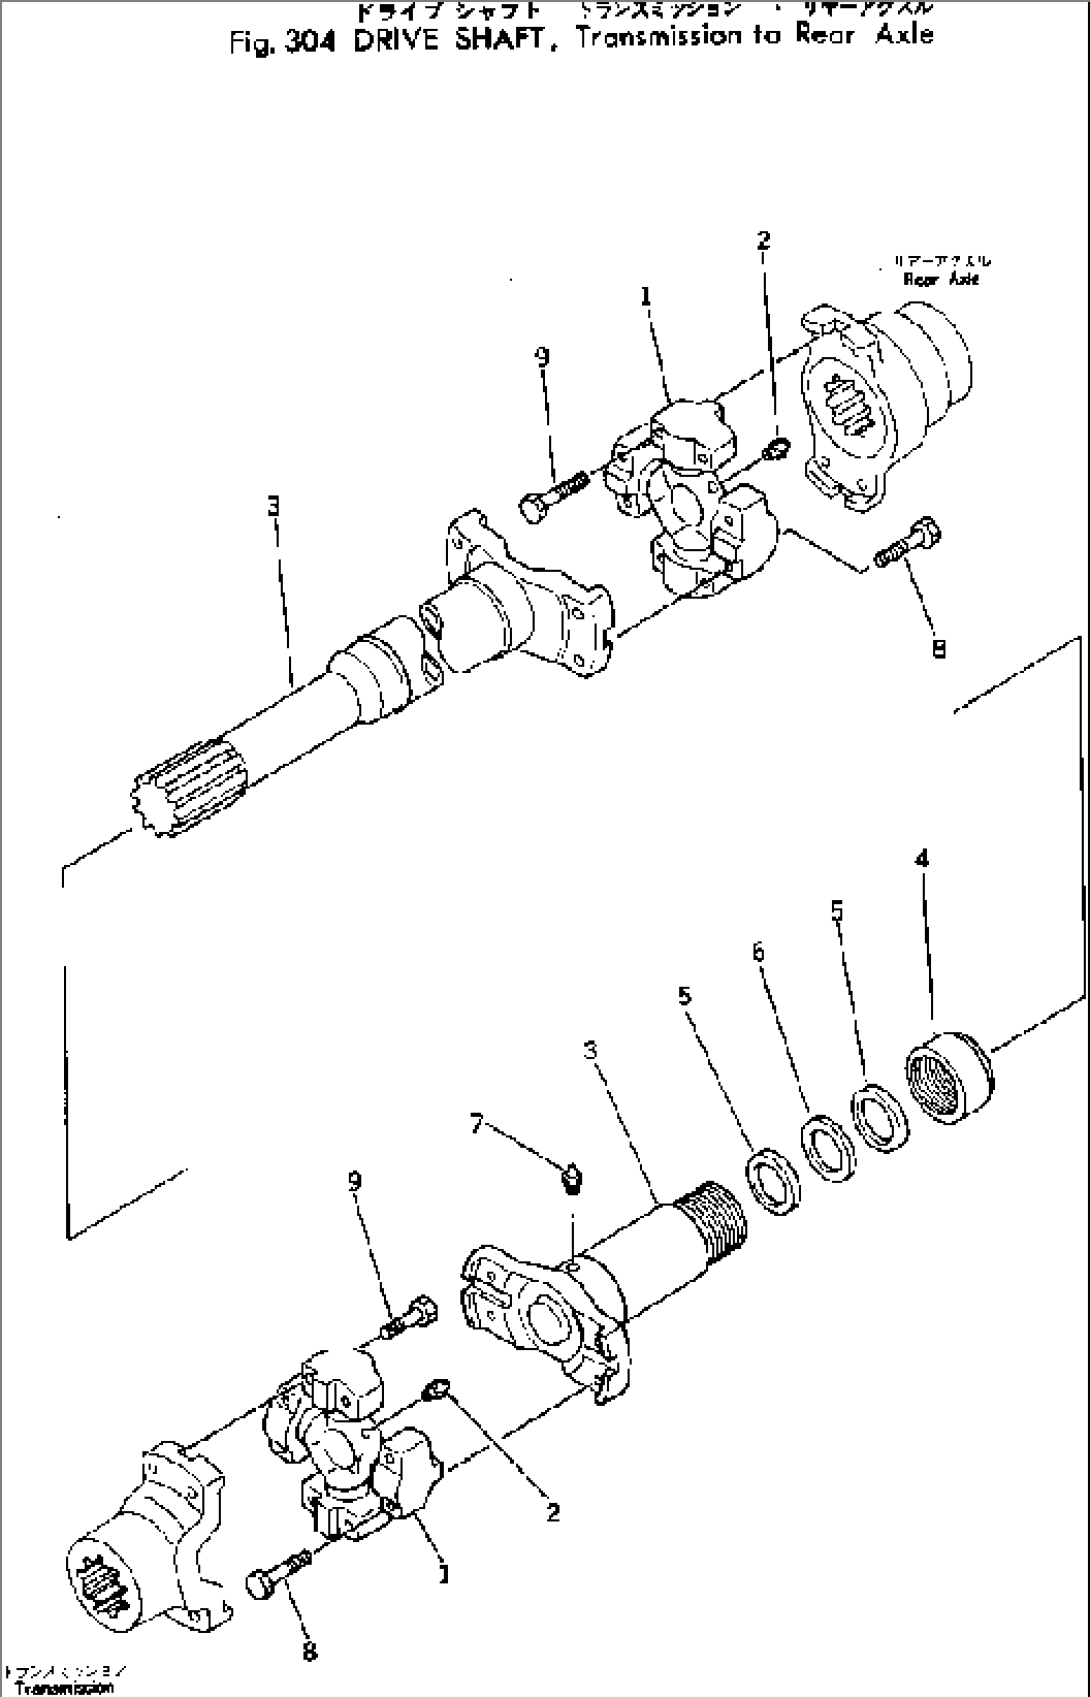 DRIVE SHAFT¤ TRANSMISSION TO REAR AXLE